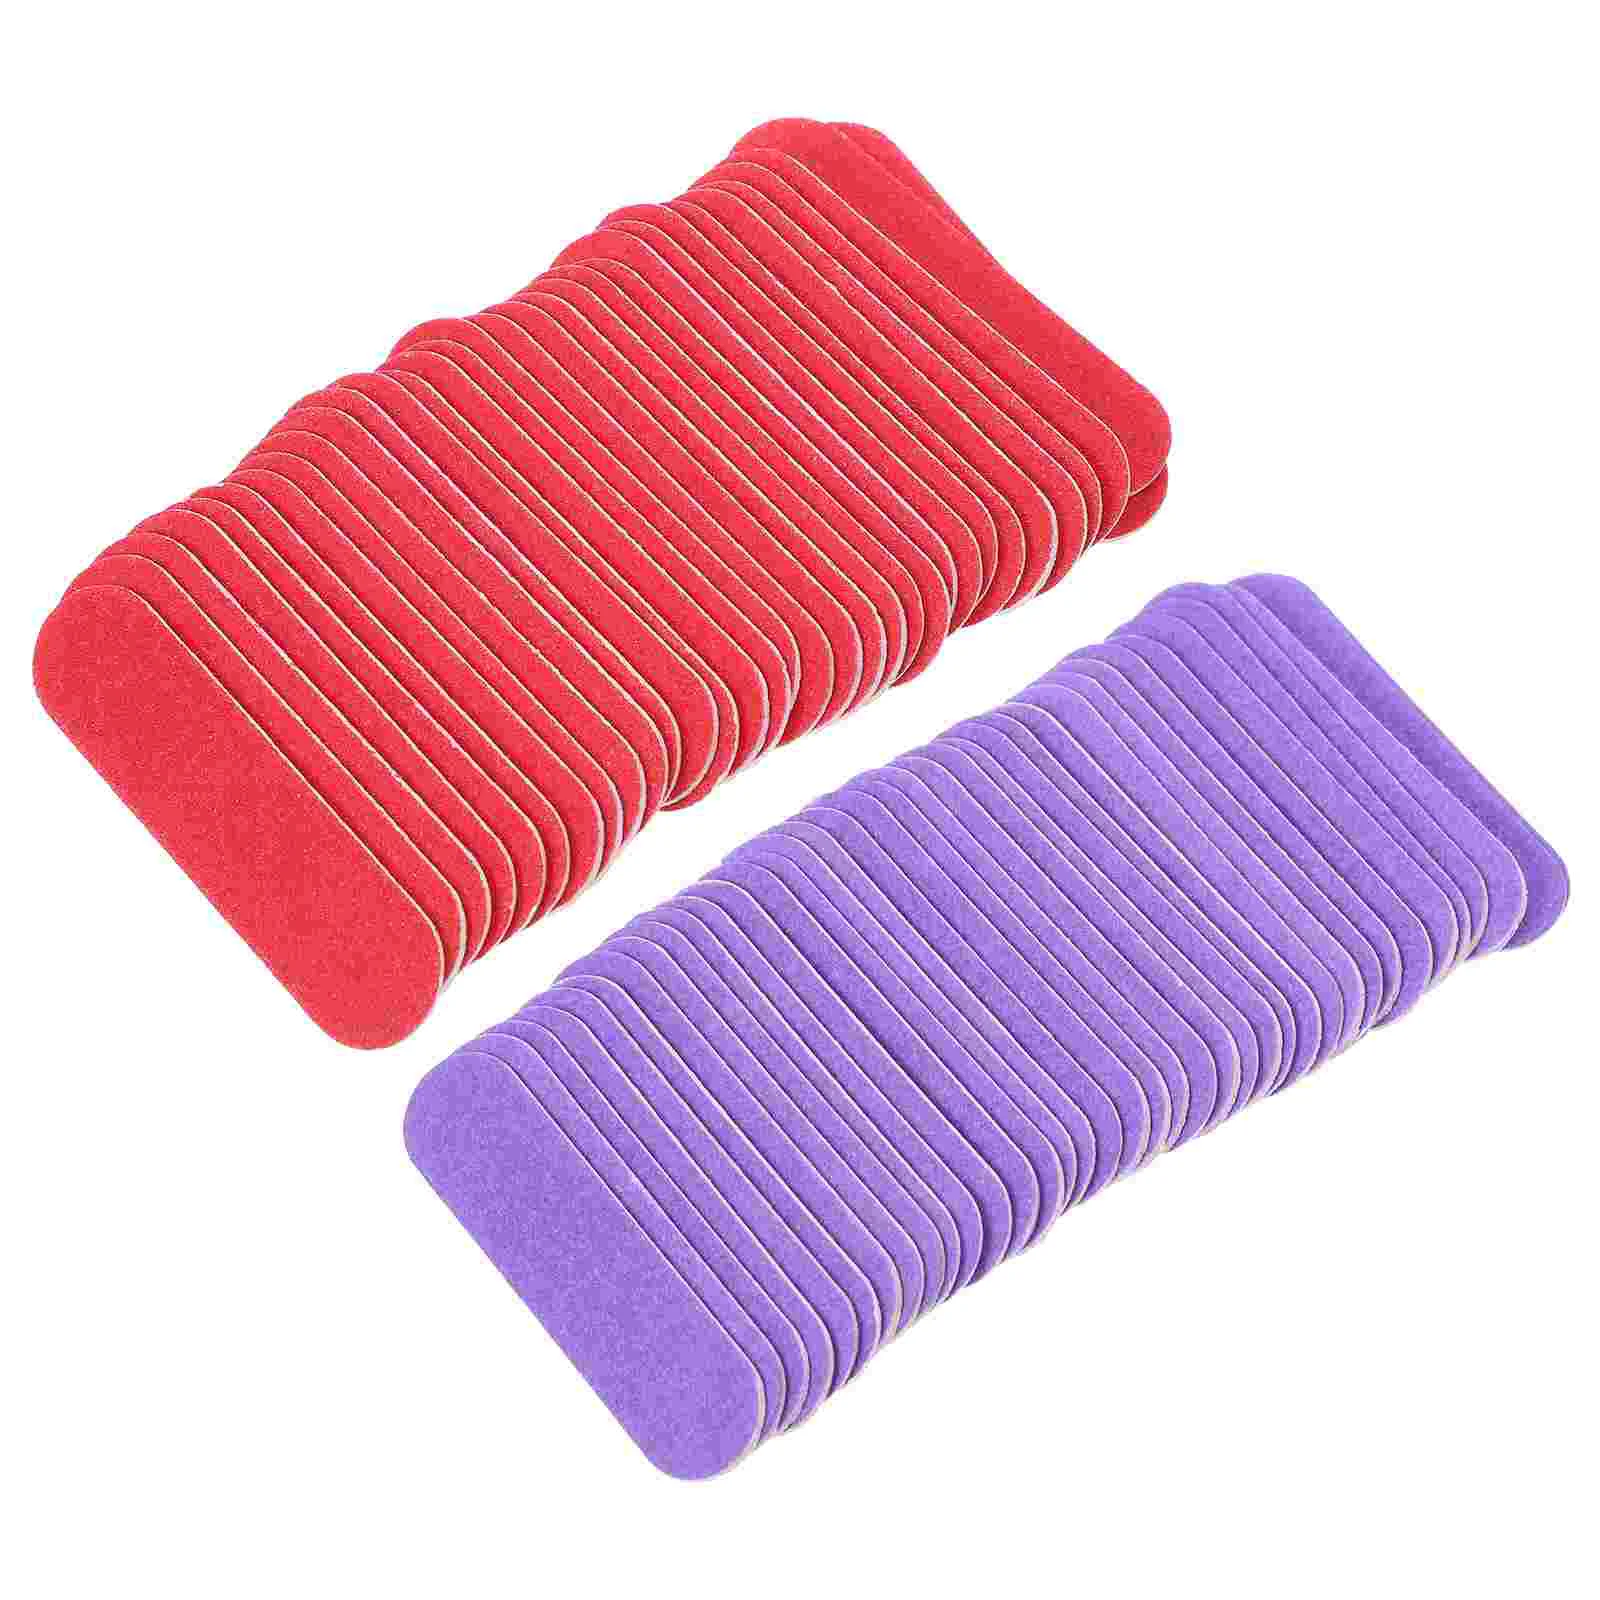 

Nail Files Emery Nails File Boards Colorful Professional Buffers Polish Grit Wooden 180 Board Set Buffer Natural